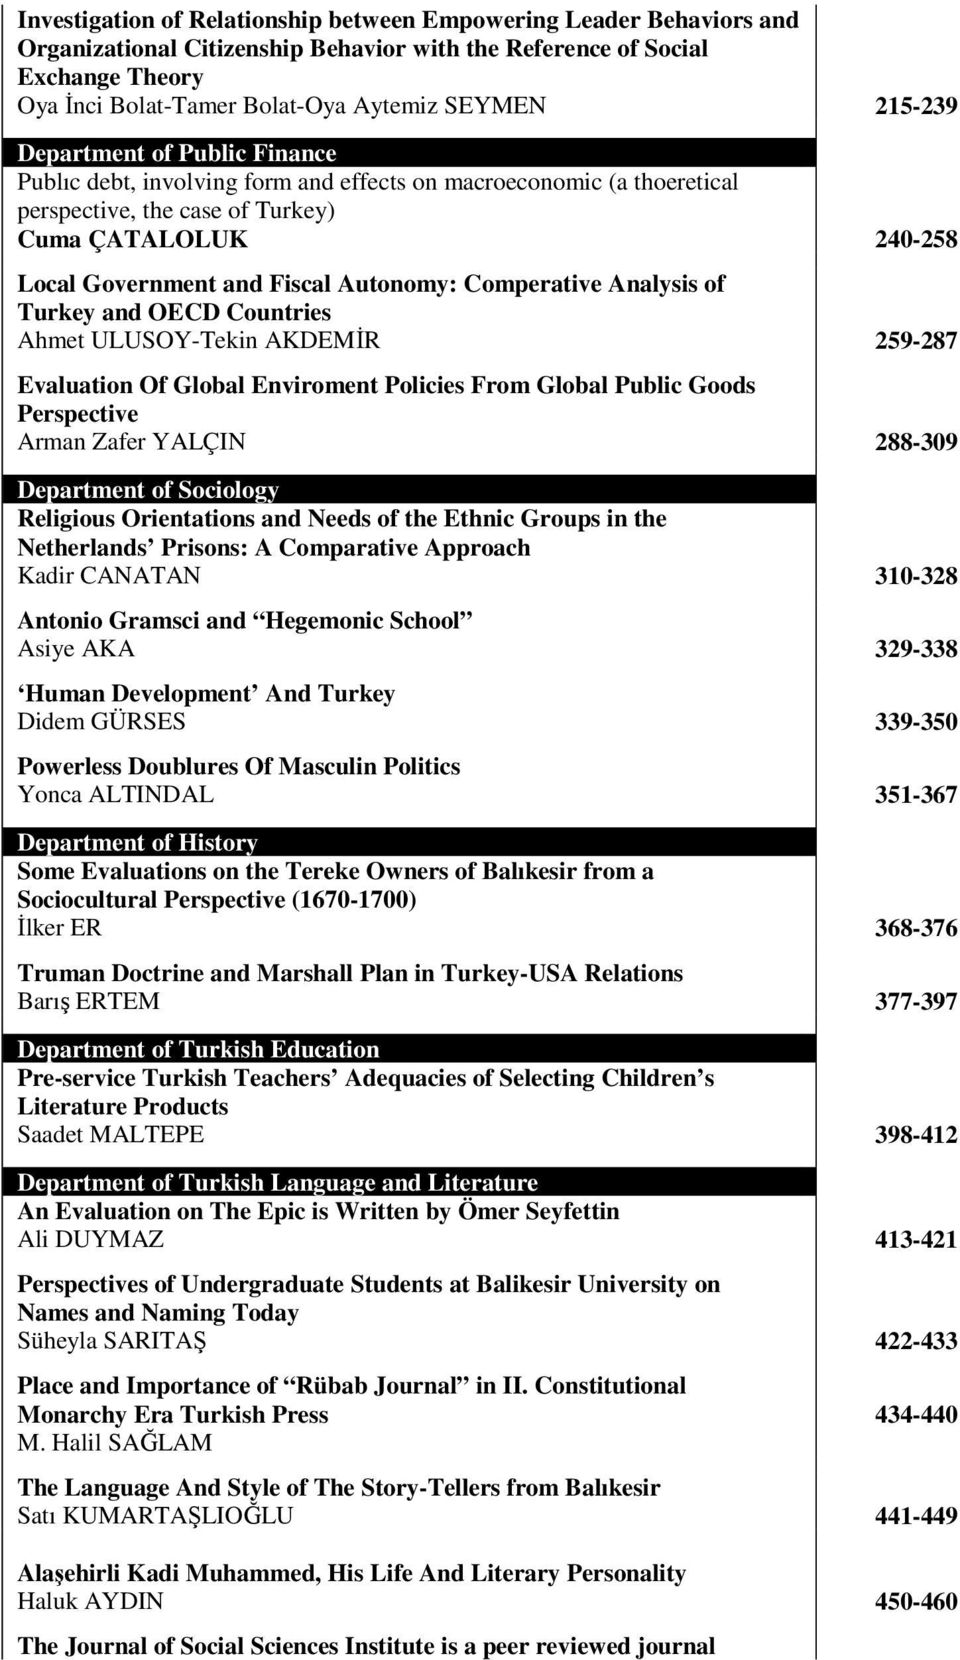 Autonomy: Comperative Analysis of Turkey and OECD Countries Ahmet ULUSOY-Tekin AKDEMİR 259-287 Evaluation Of Global Enviroment Policies From Global Public Goods Perspective Arman Zafer YALÇIN 288-309